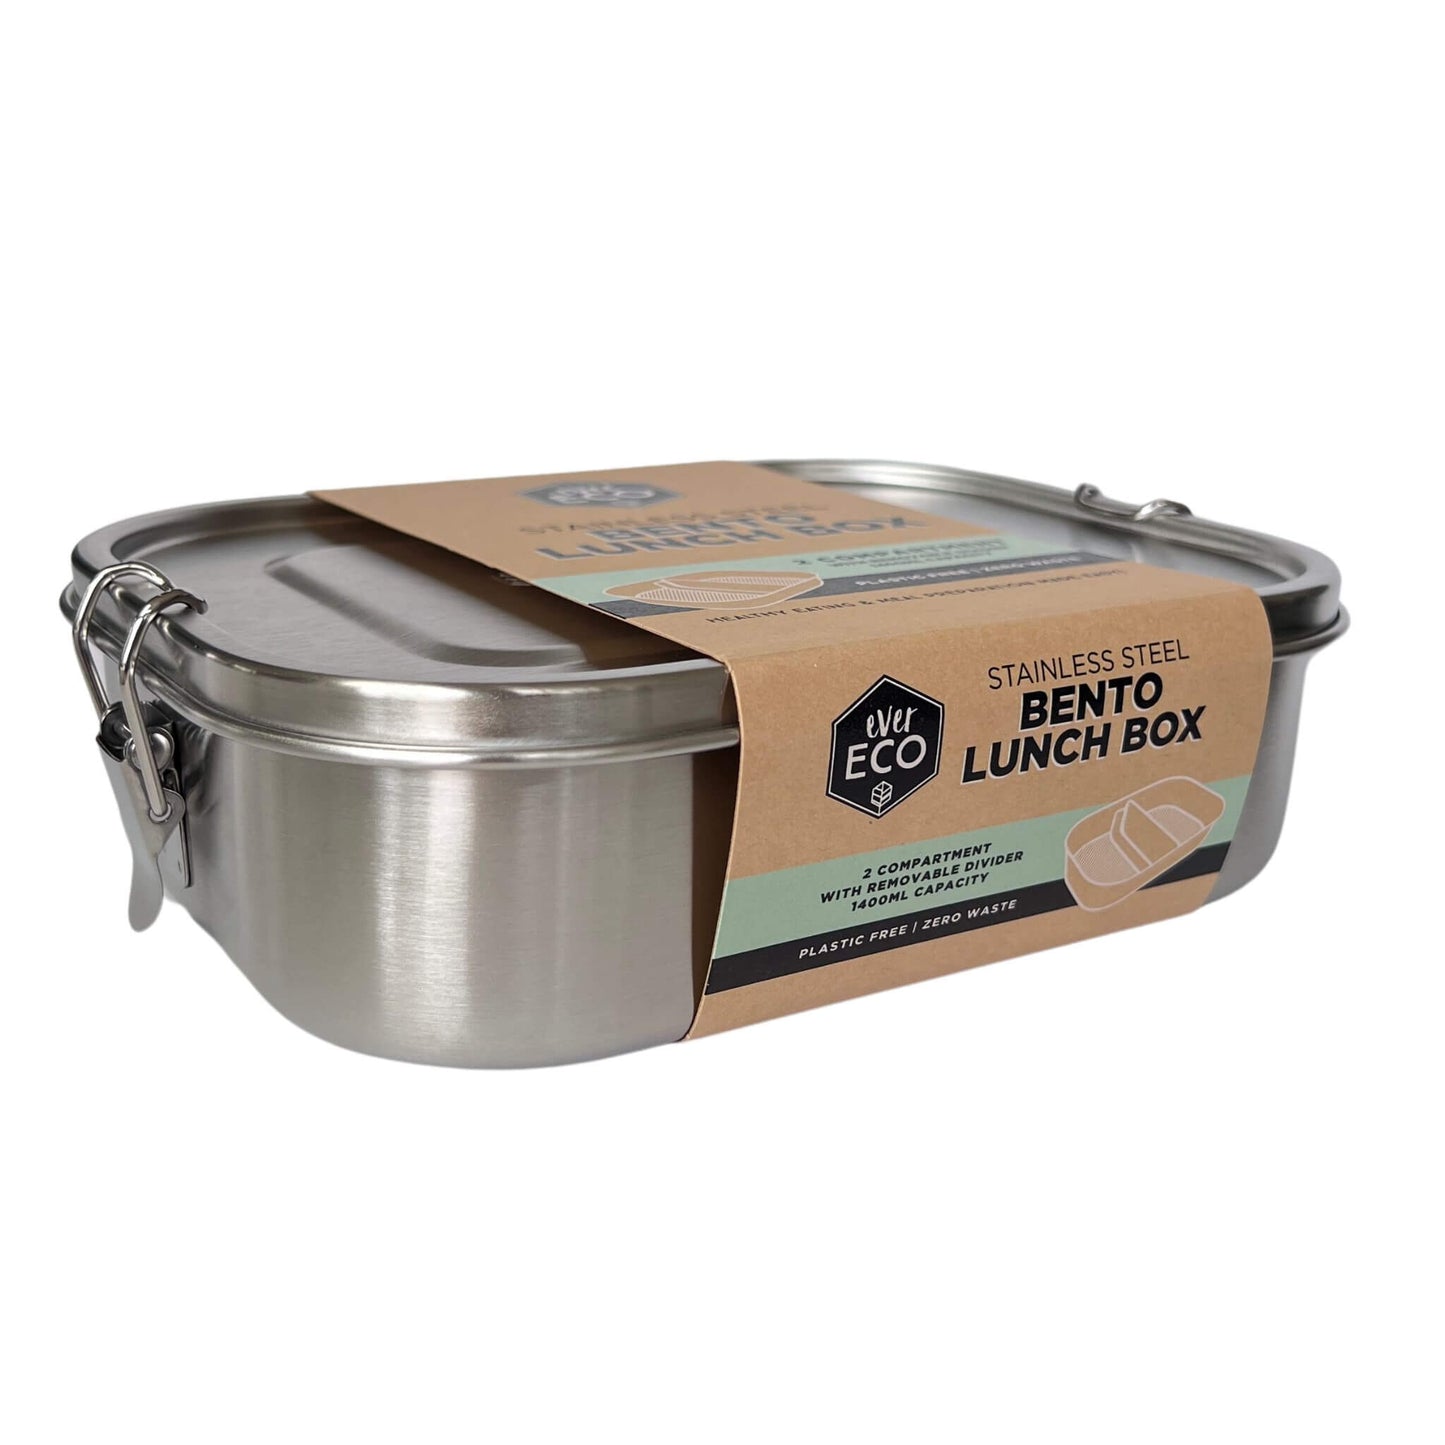 ever eco stainless steel bento lunch box